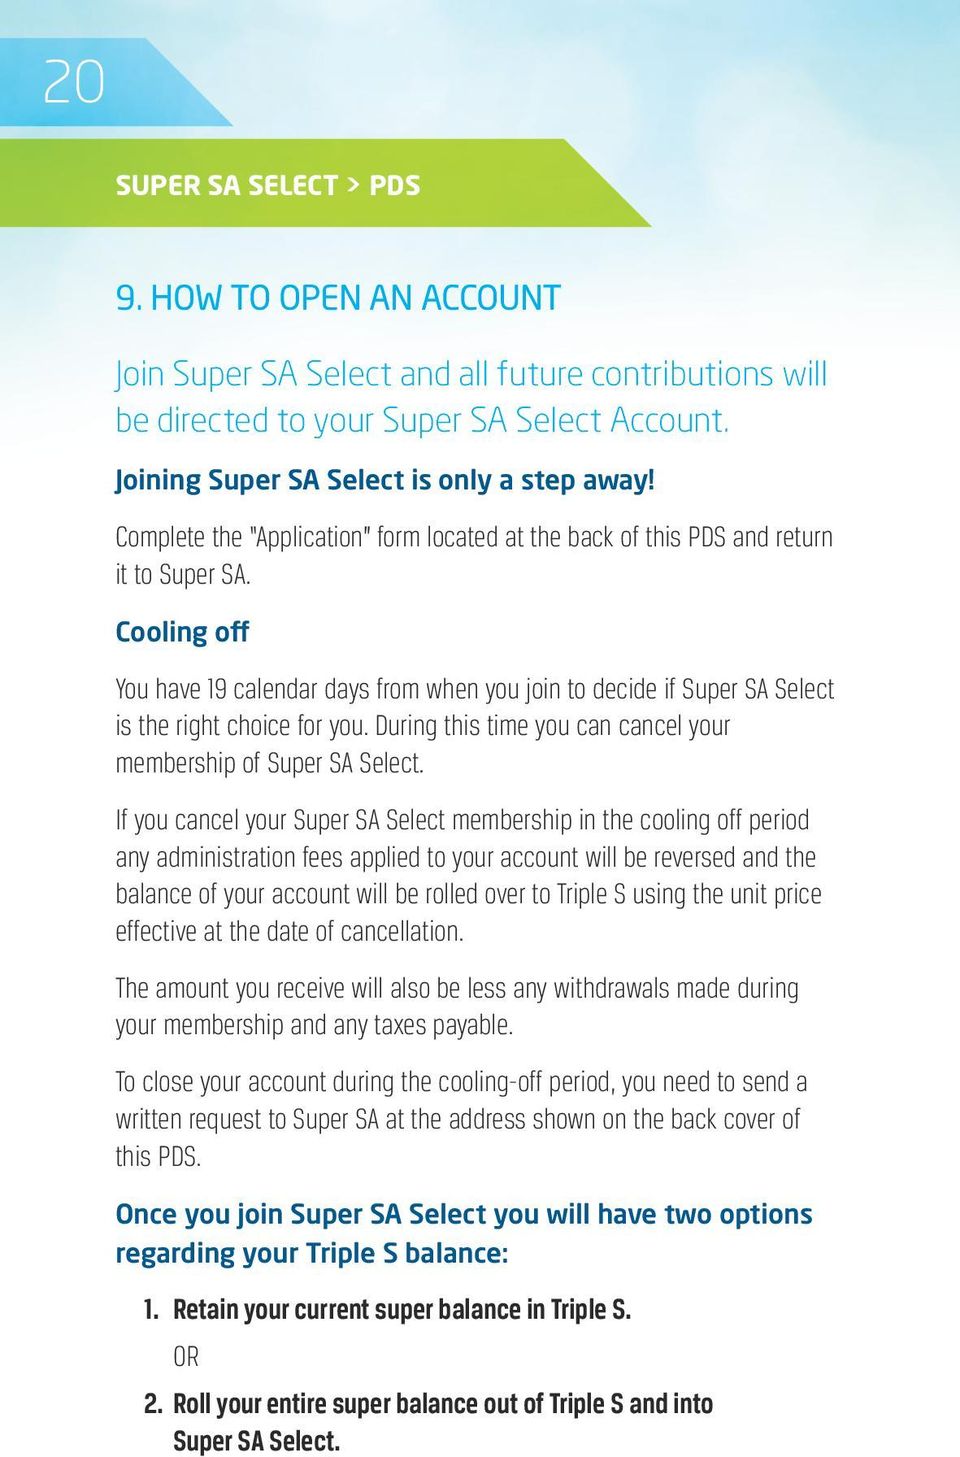 Cooling off You have 19 calendar days from when you join to decide if Super SA Select is the right choice for you. During this time you can cancel your membership of Super SA Select.